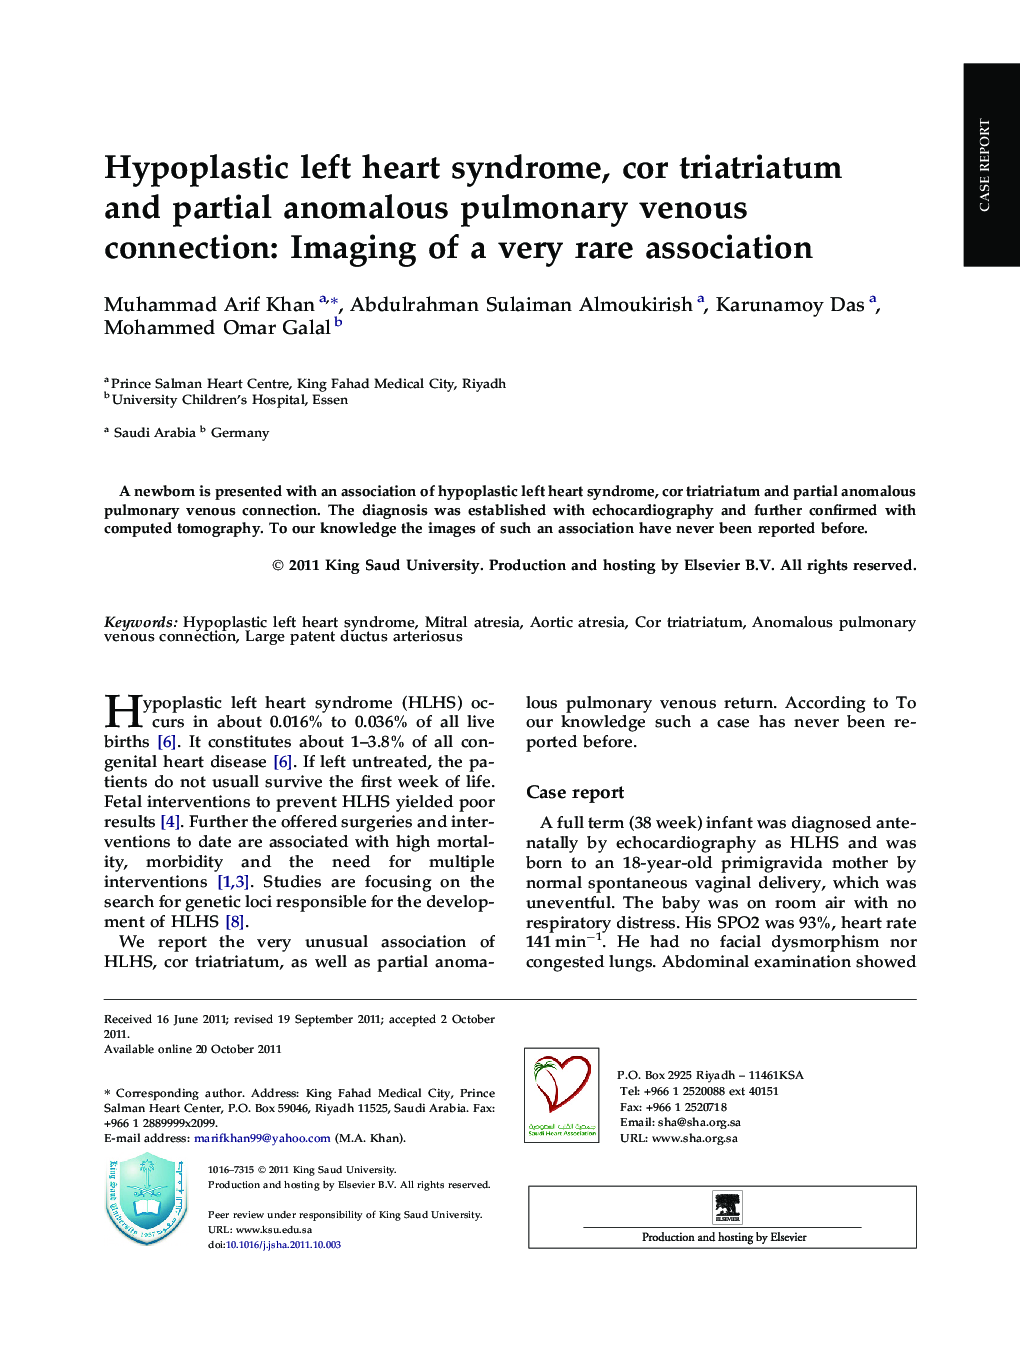 Hypoplastic left heart syndrome, cor triatriatum and partial anomalous pulmonary venous connection: Imaging of a very rare association